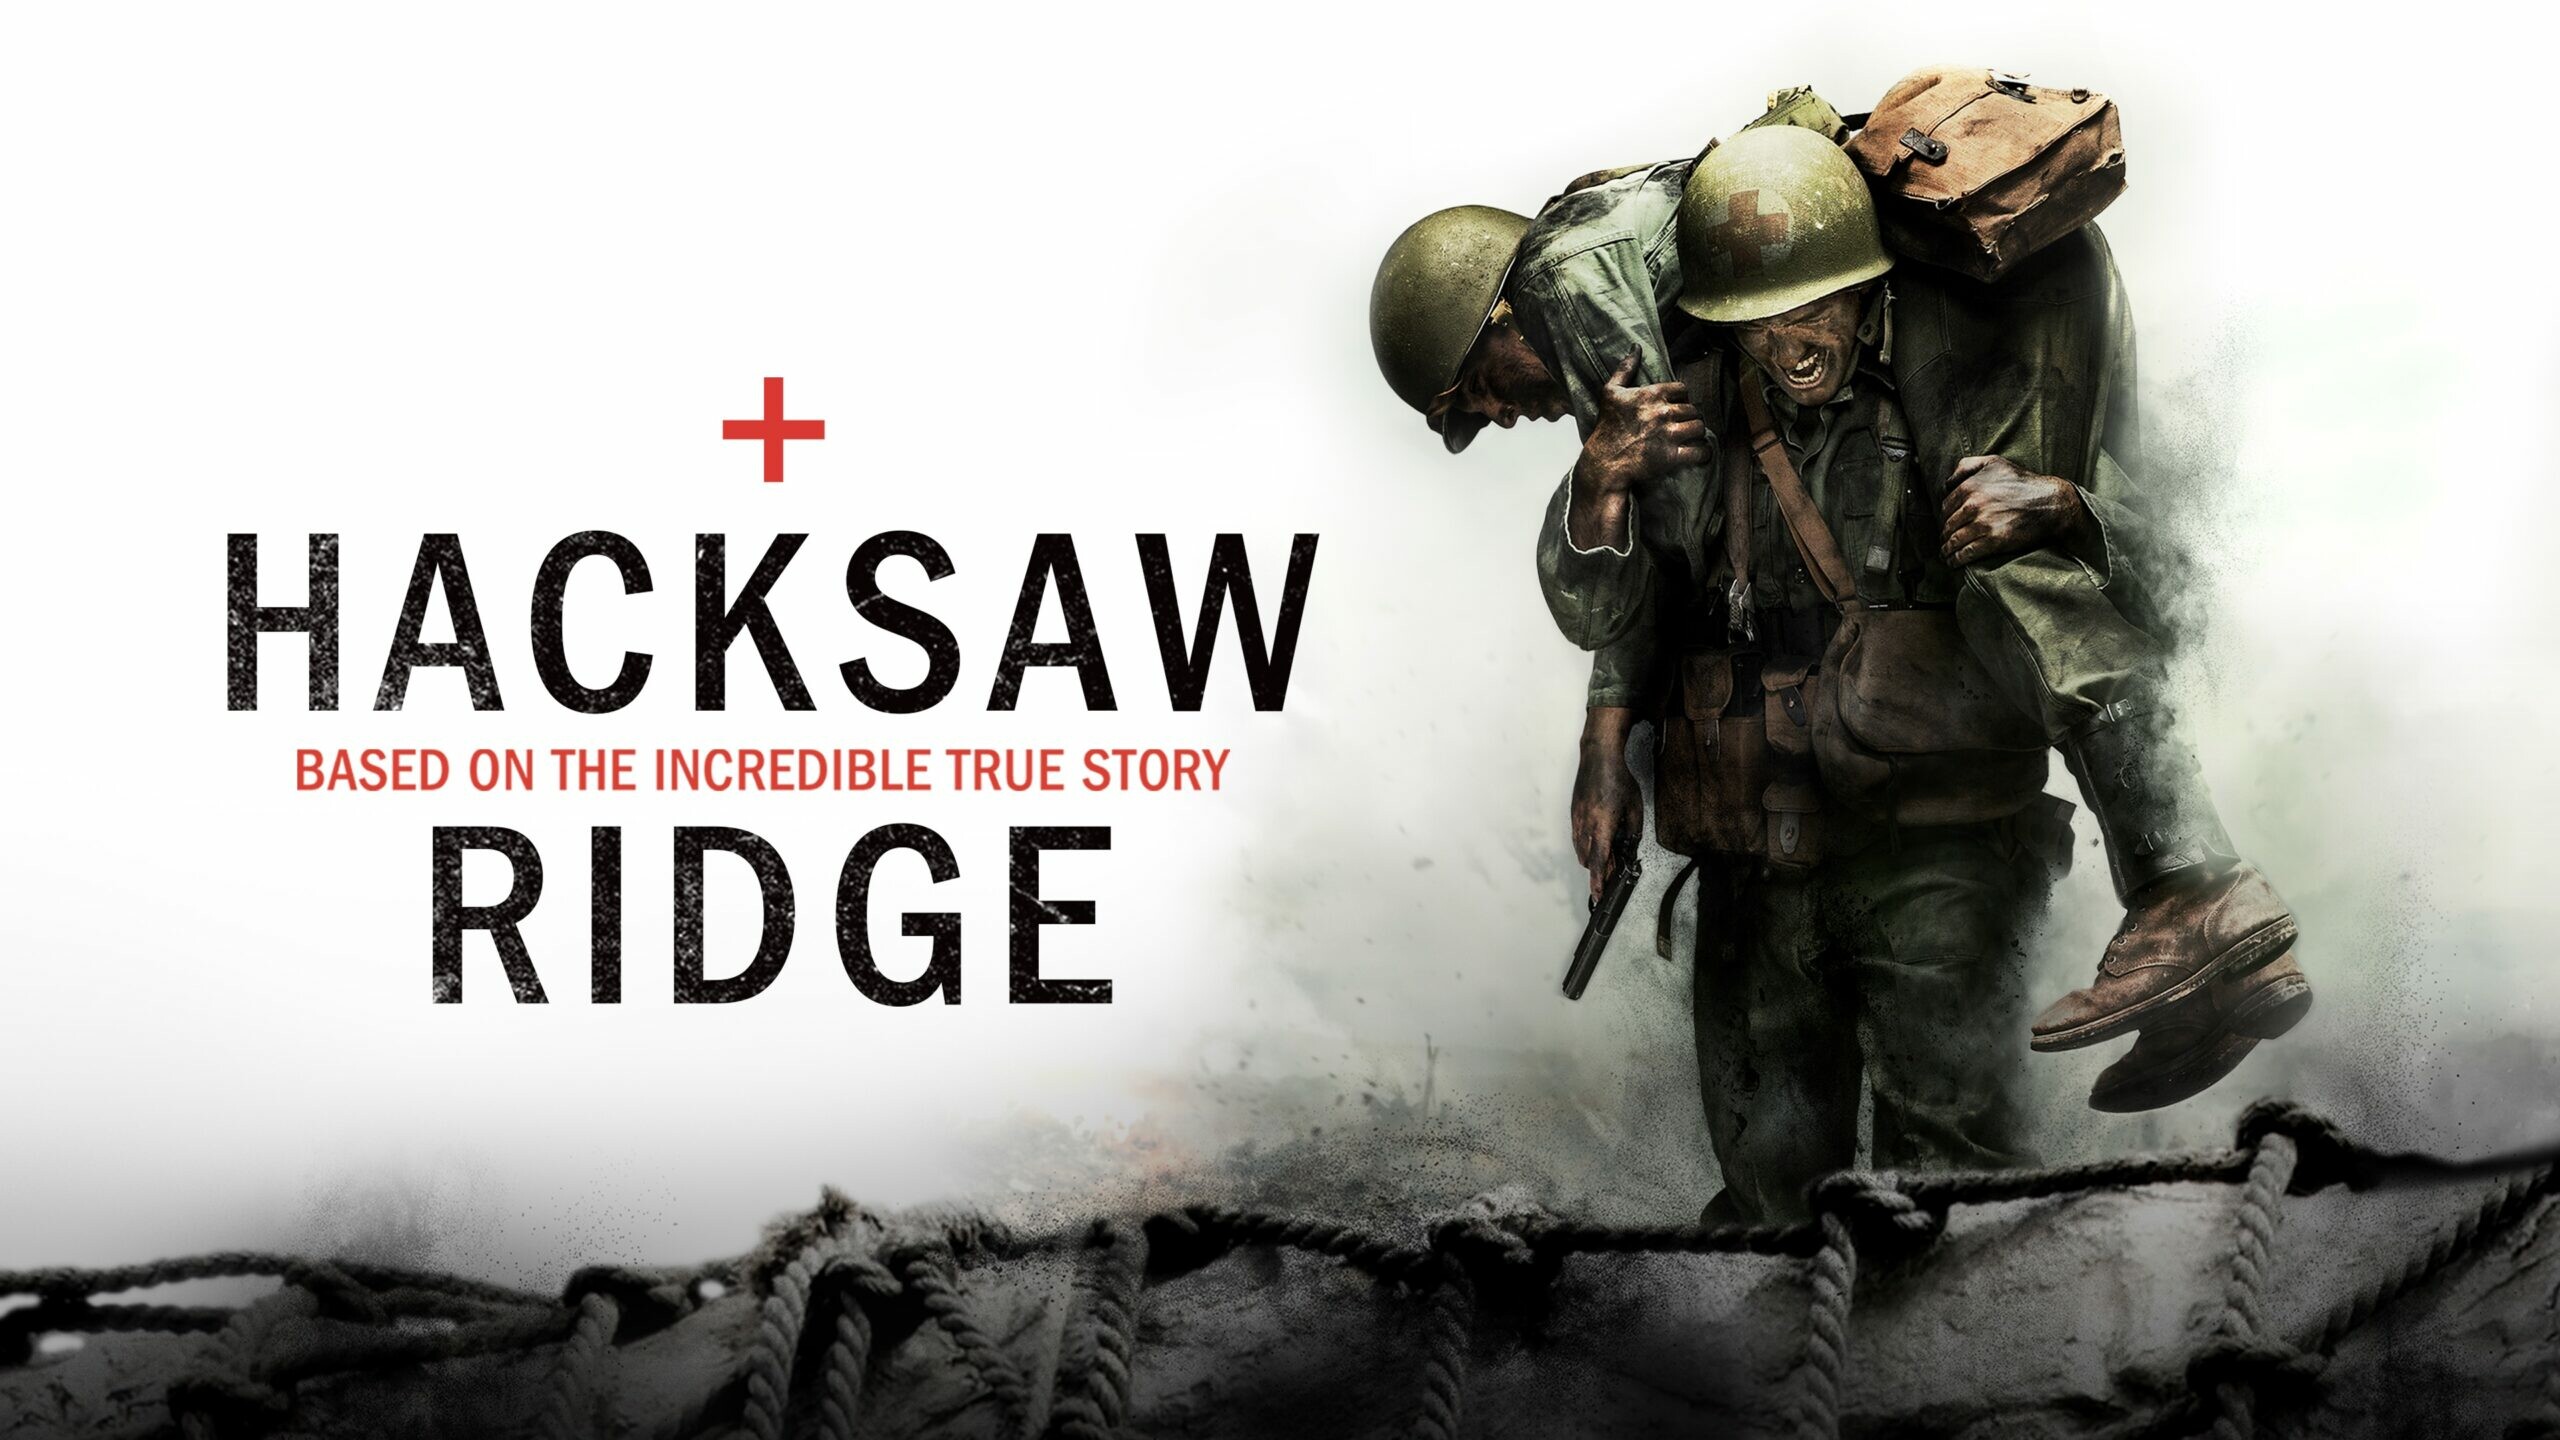 Hacksaw Ridge: The film was released in the United States on November 4, 2016. 2560x1440 HD Wallpaper.